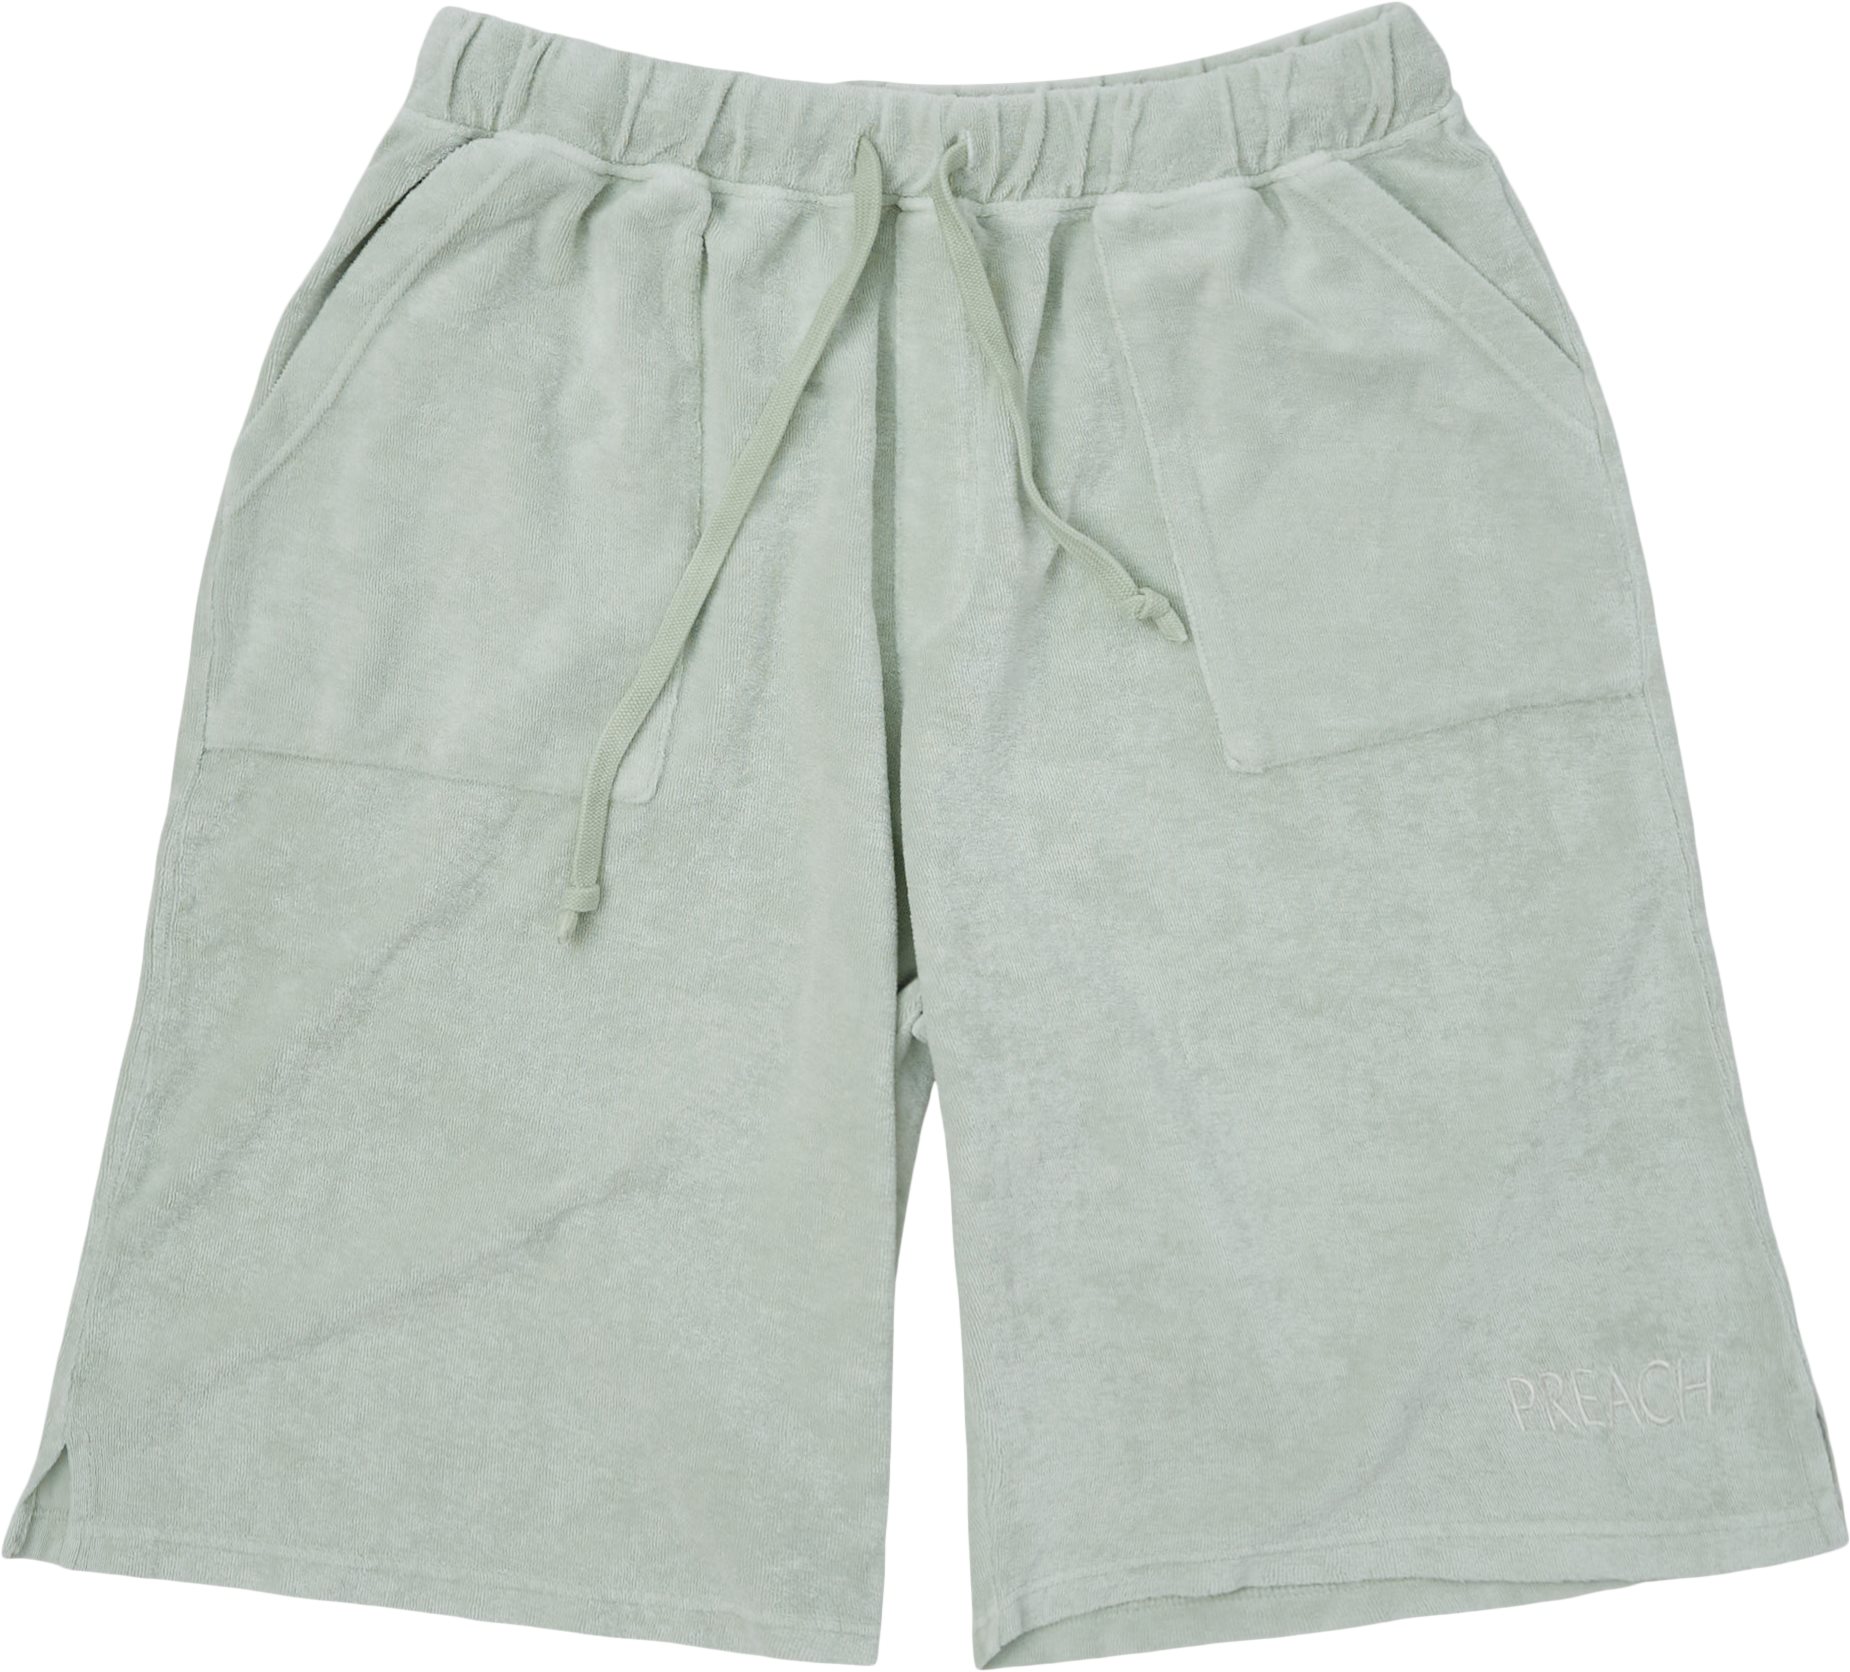 Long Frottee Shorts - Shorts - Loose fit - Green